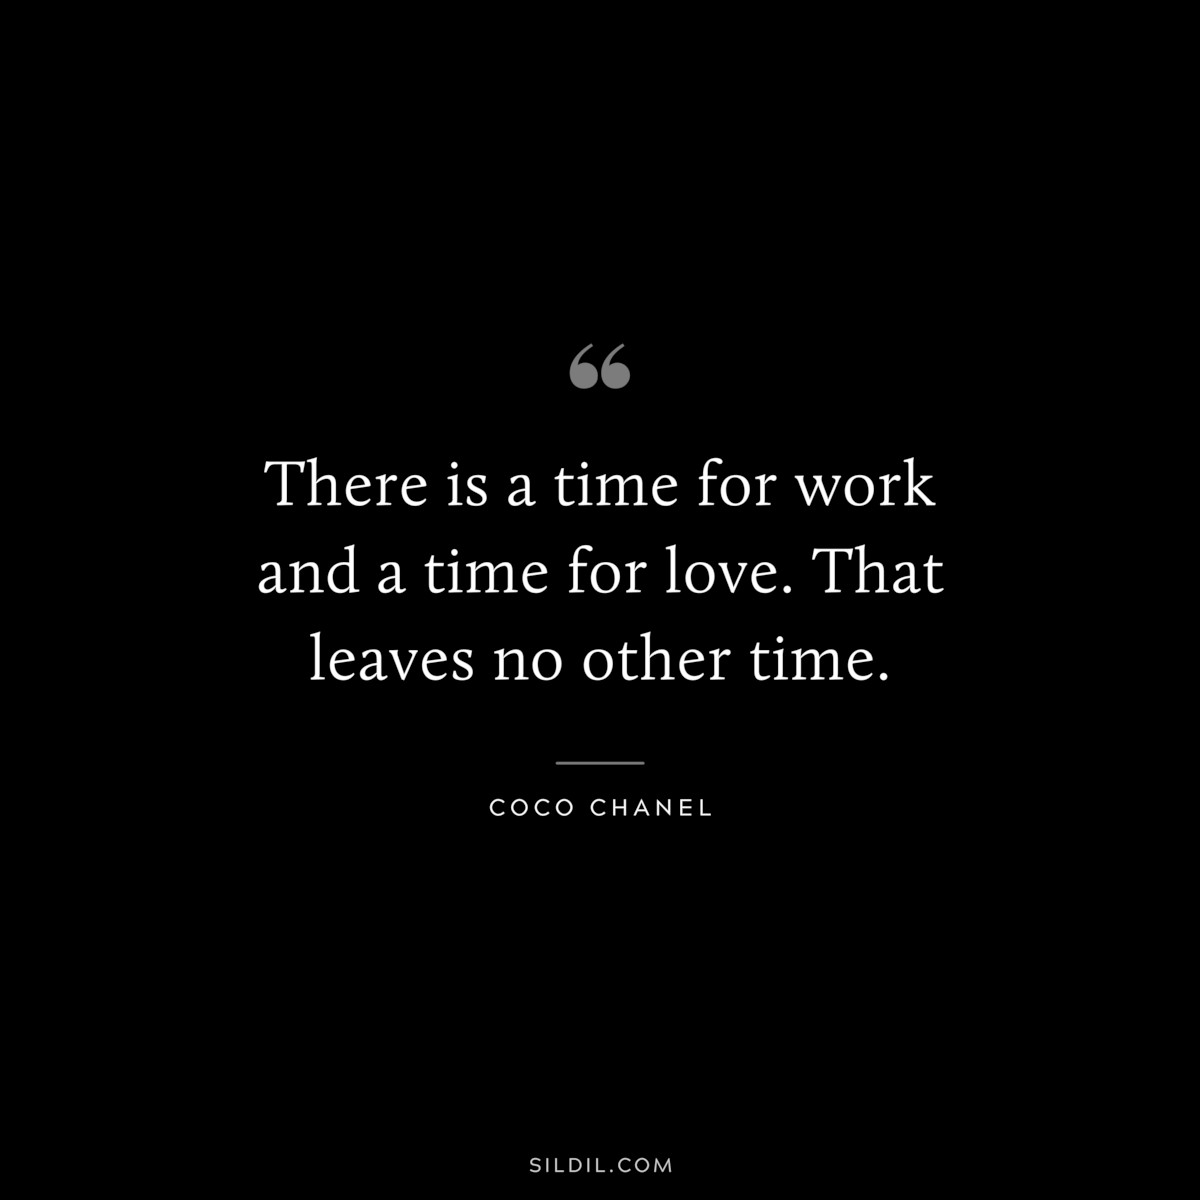 There is a time for work and a time for love. That leaves no other time. ― Coco Chanel